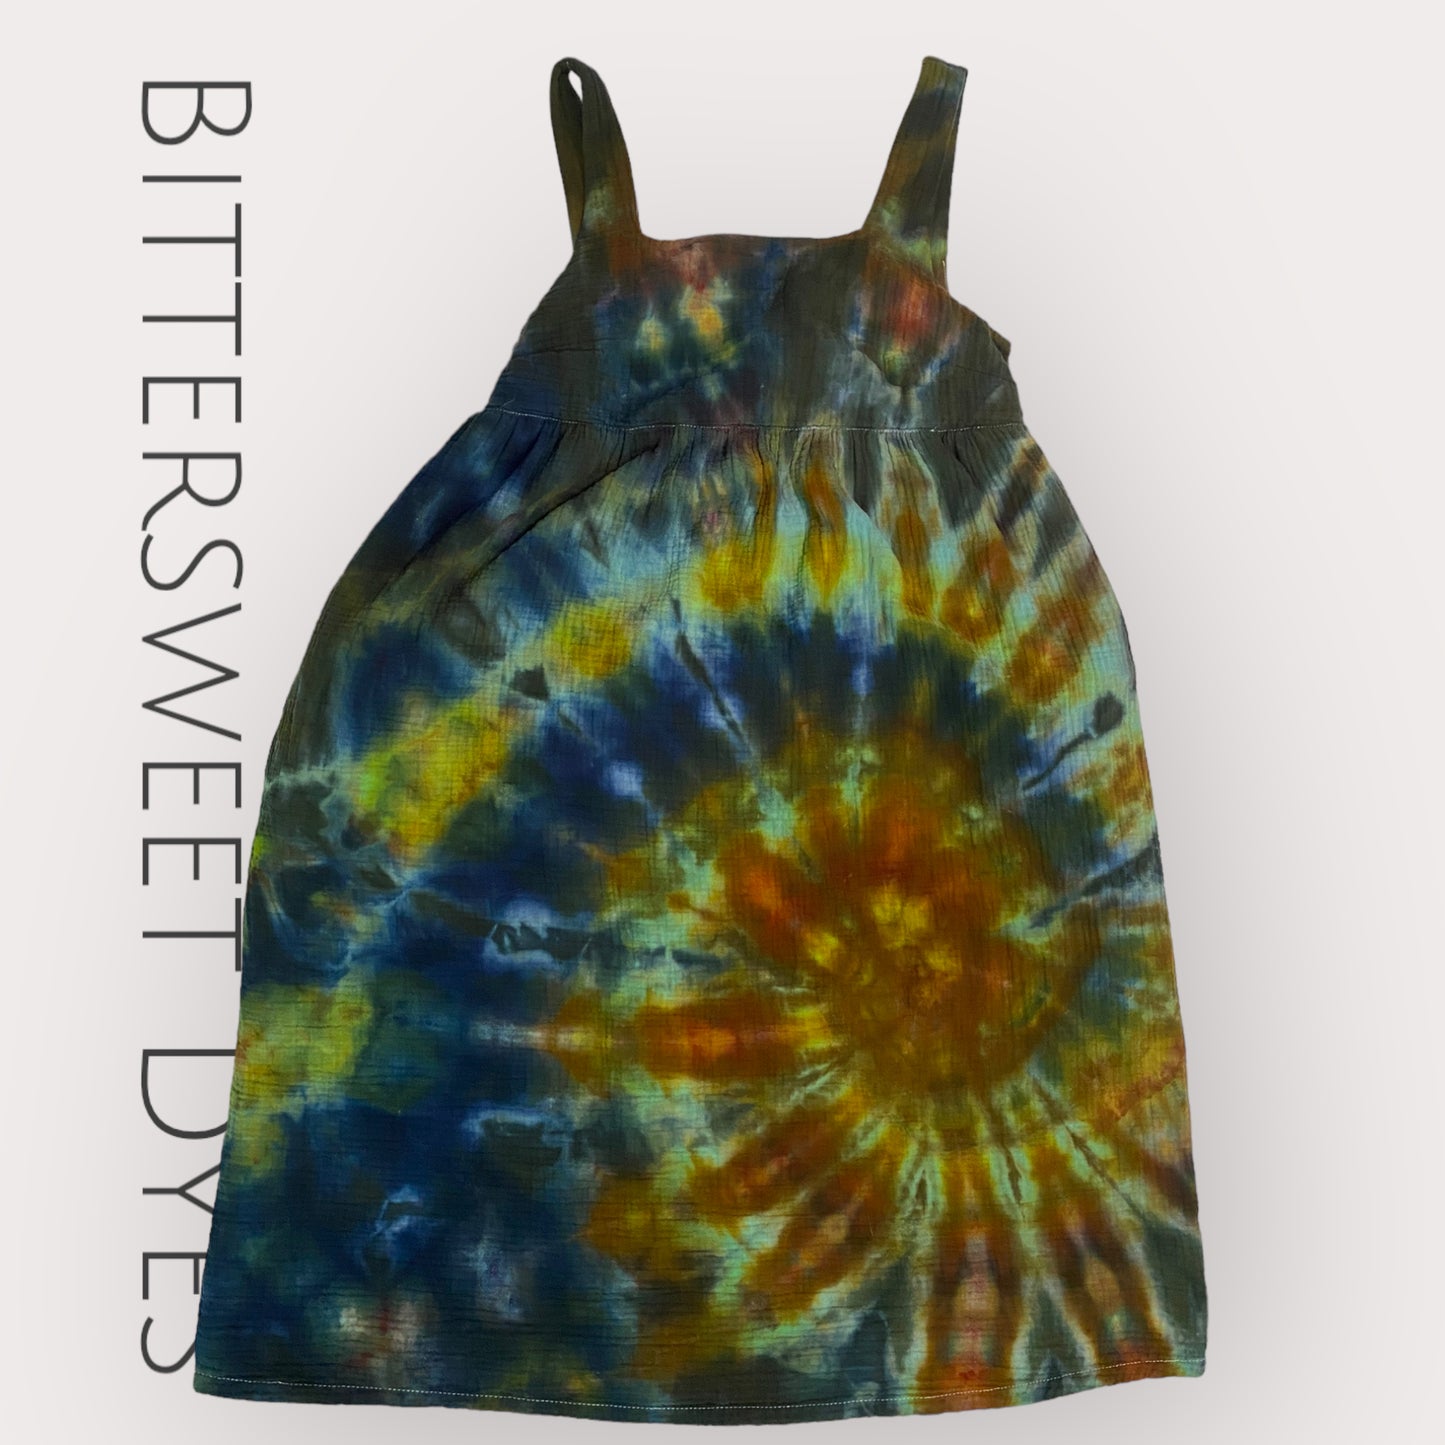 Small Ice Dye Dress with Pockets